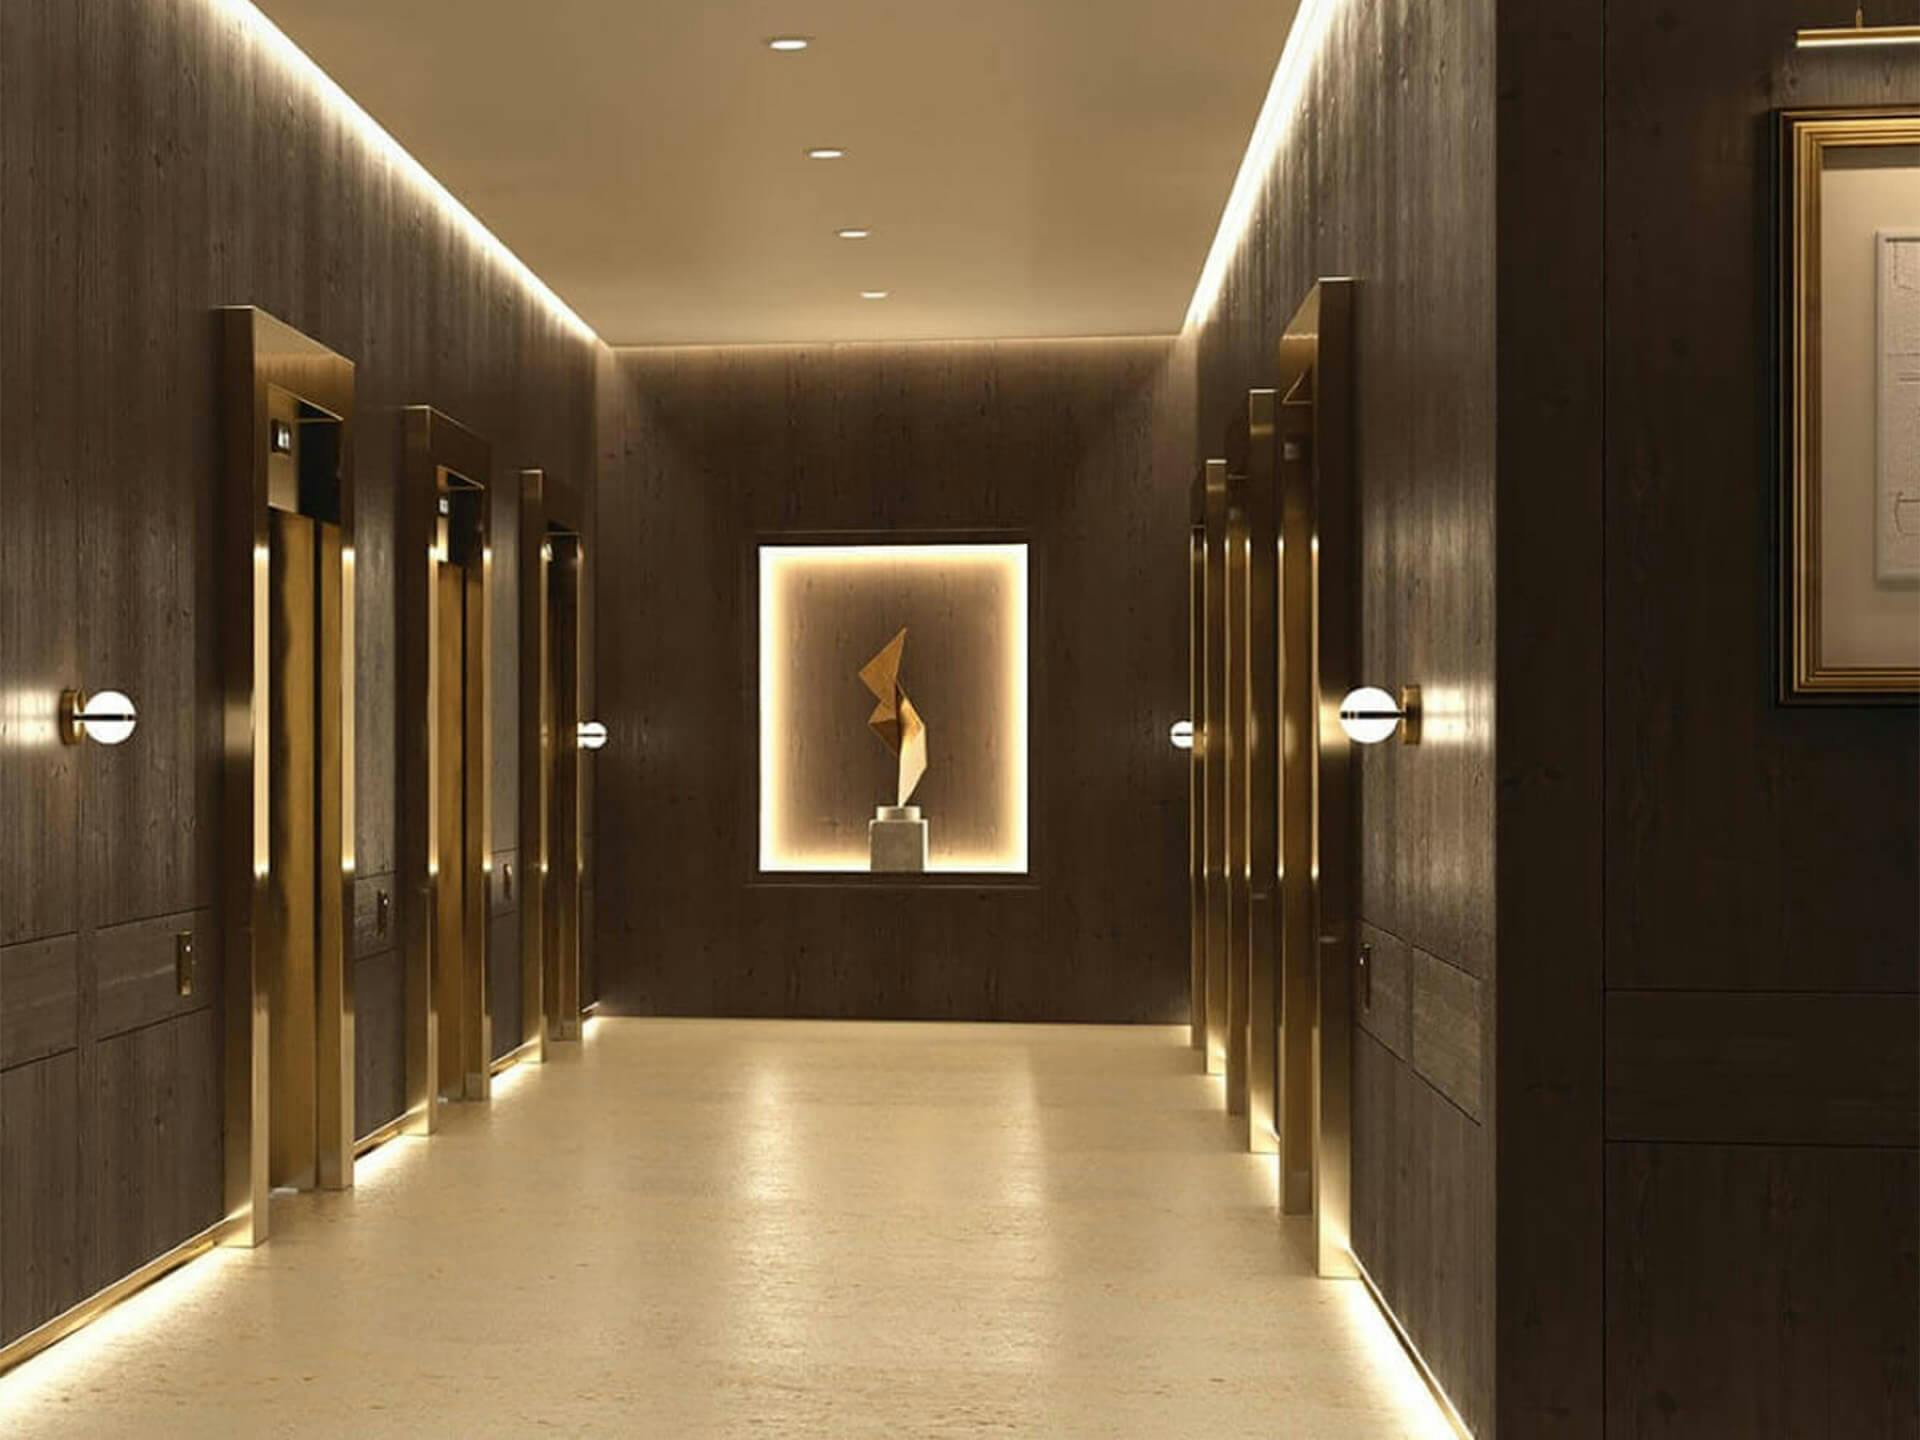 Interior corridor lit with variety of ceiling lights and sconces, lined by elevators